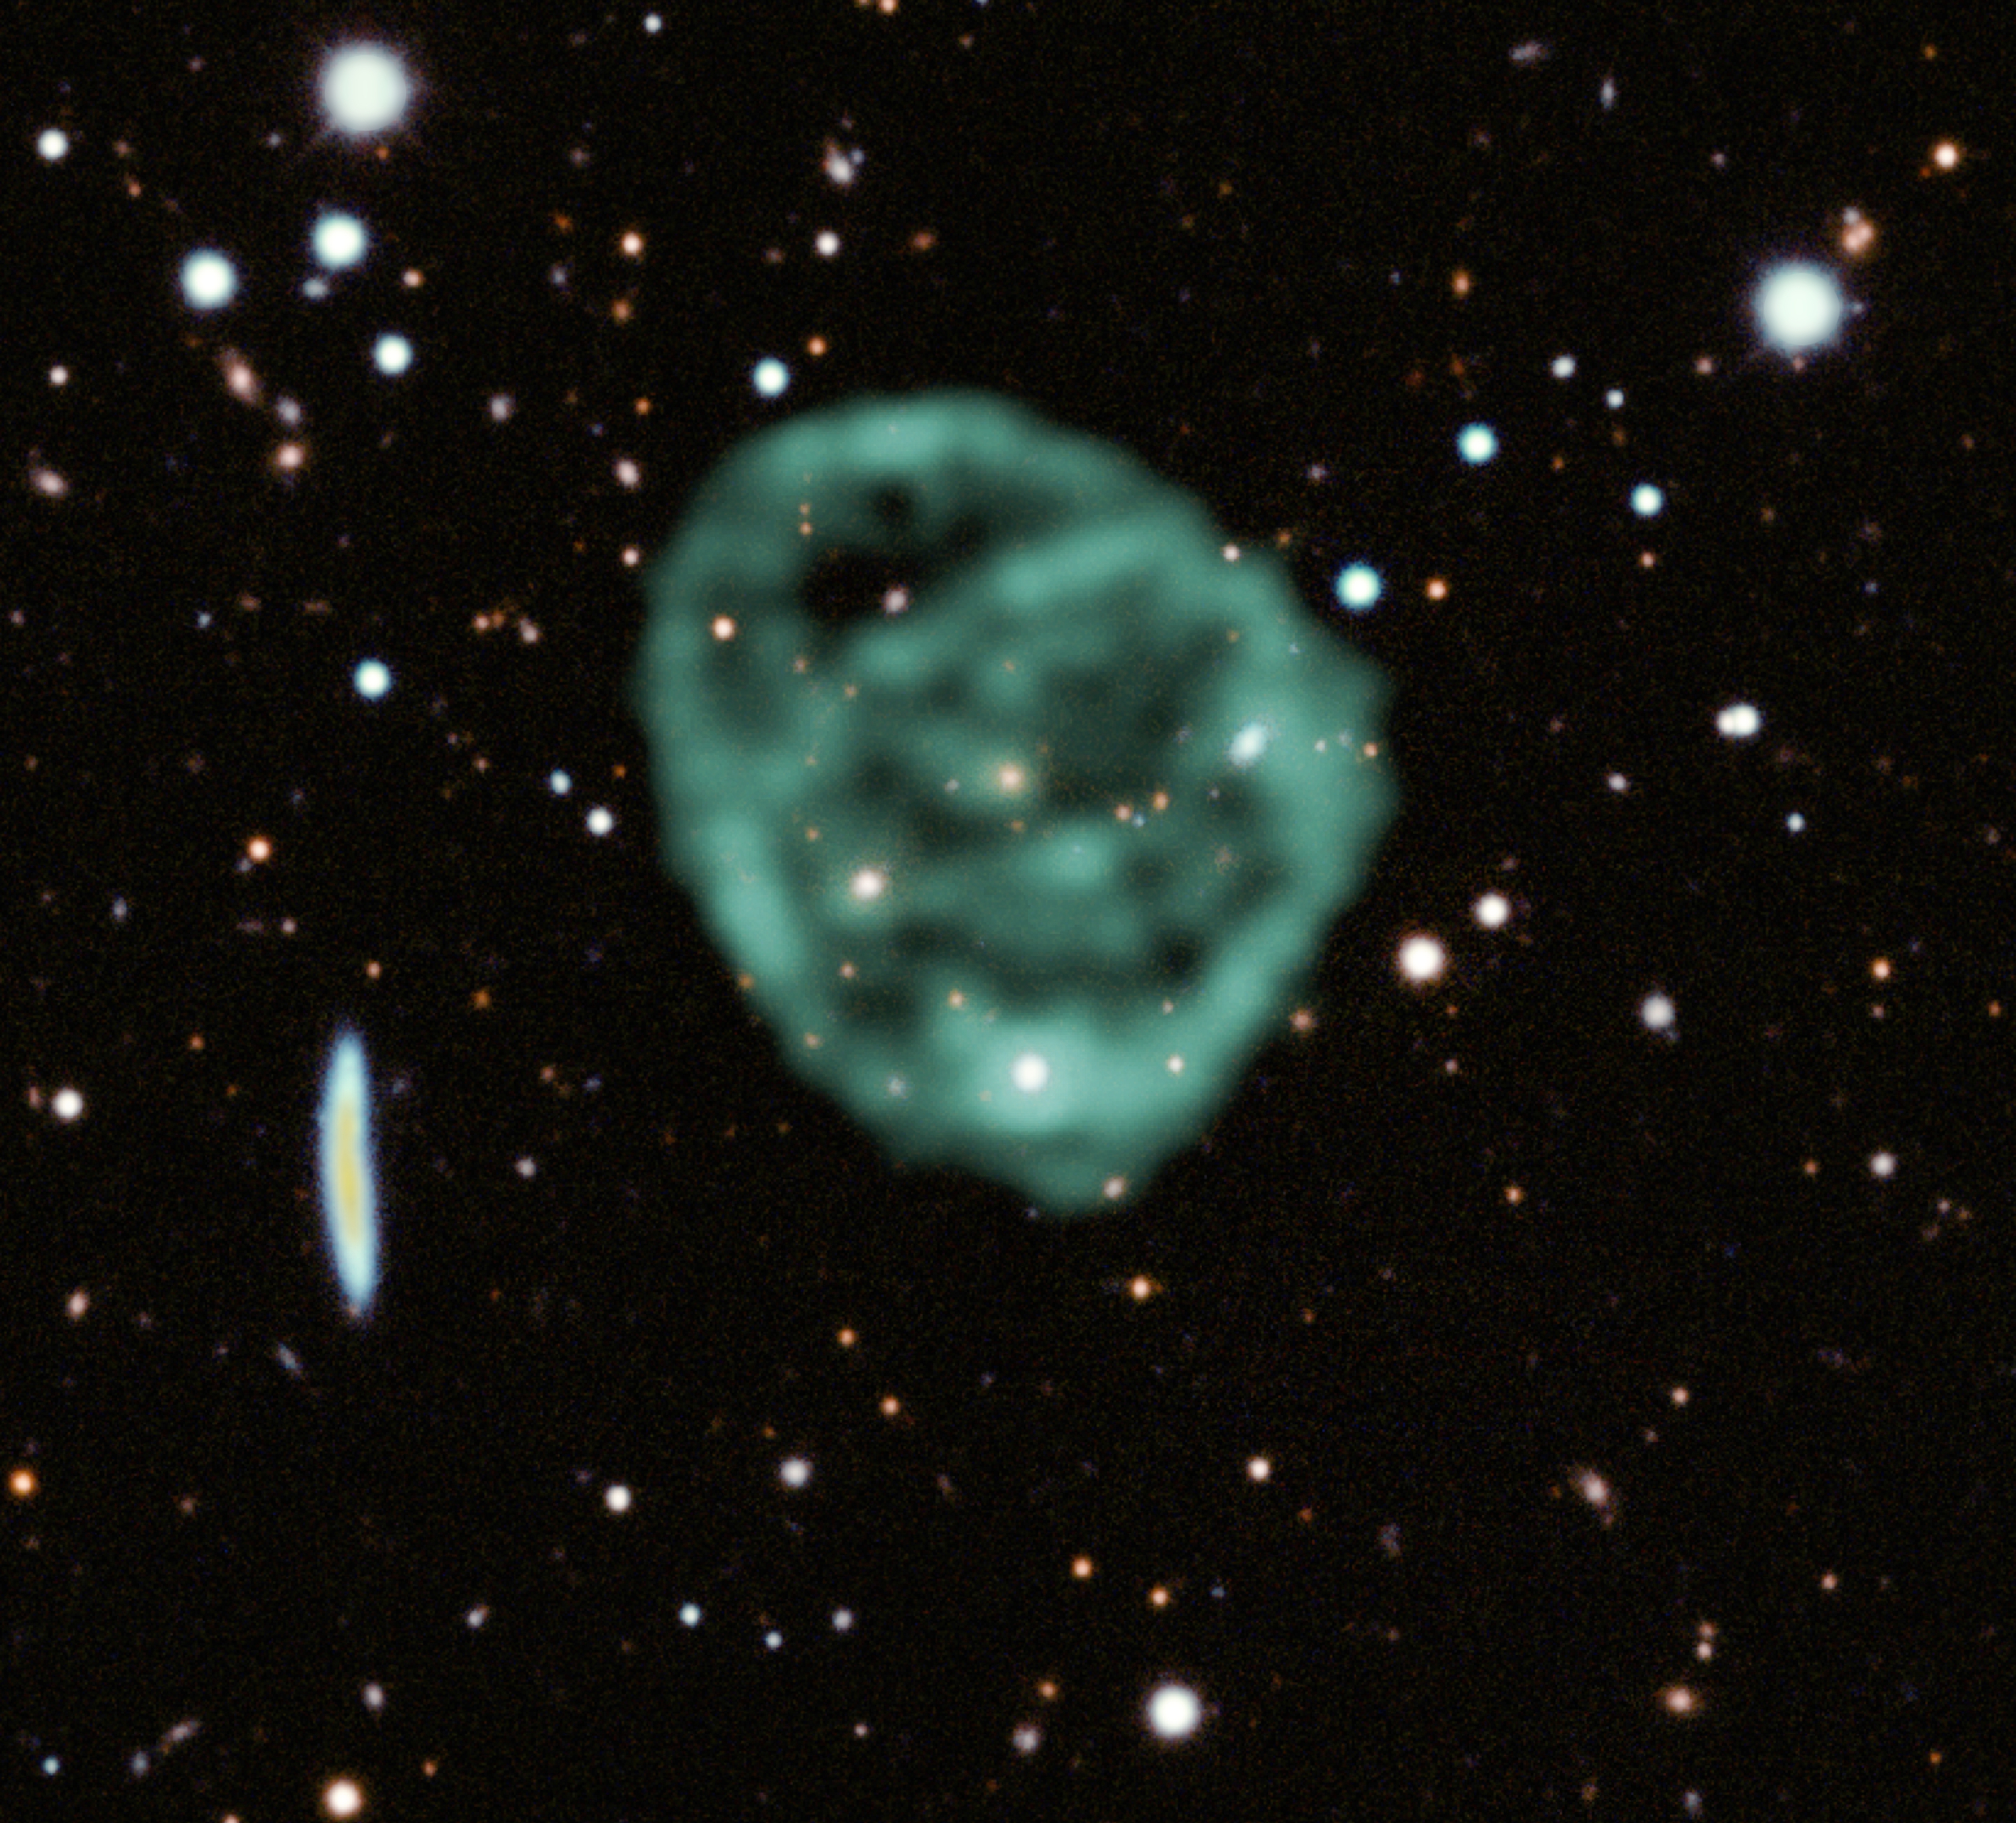 Fuzzy green conjoined bubbles hanging in the star studded darkness of space.